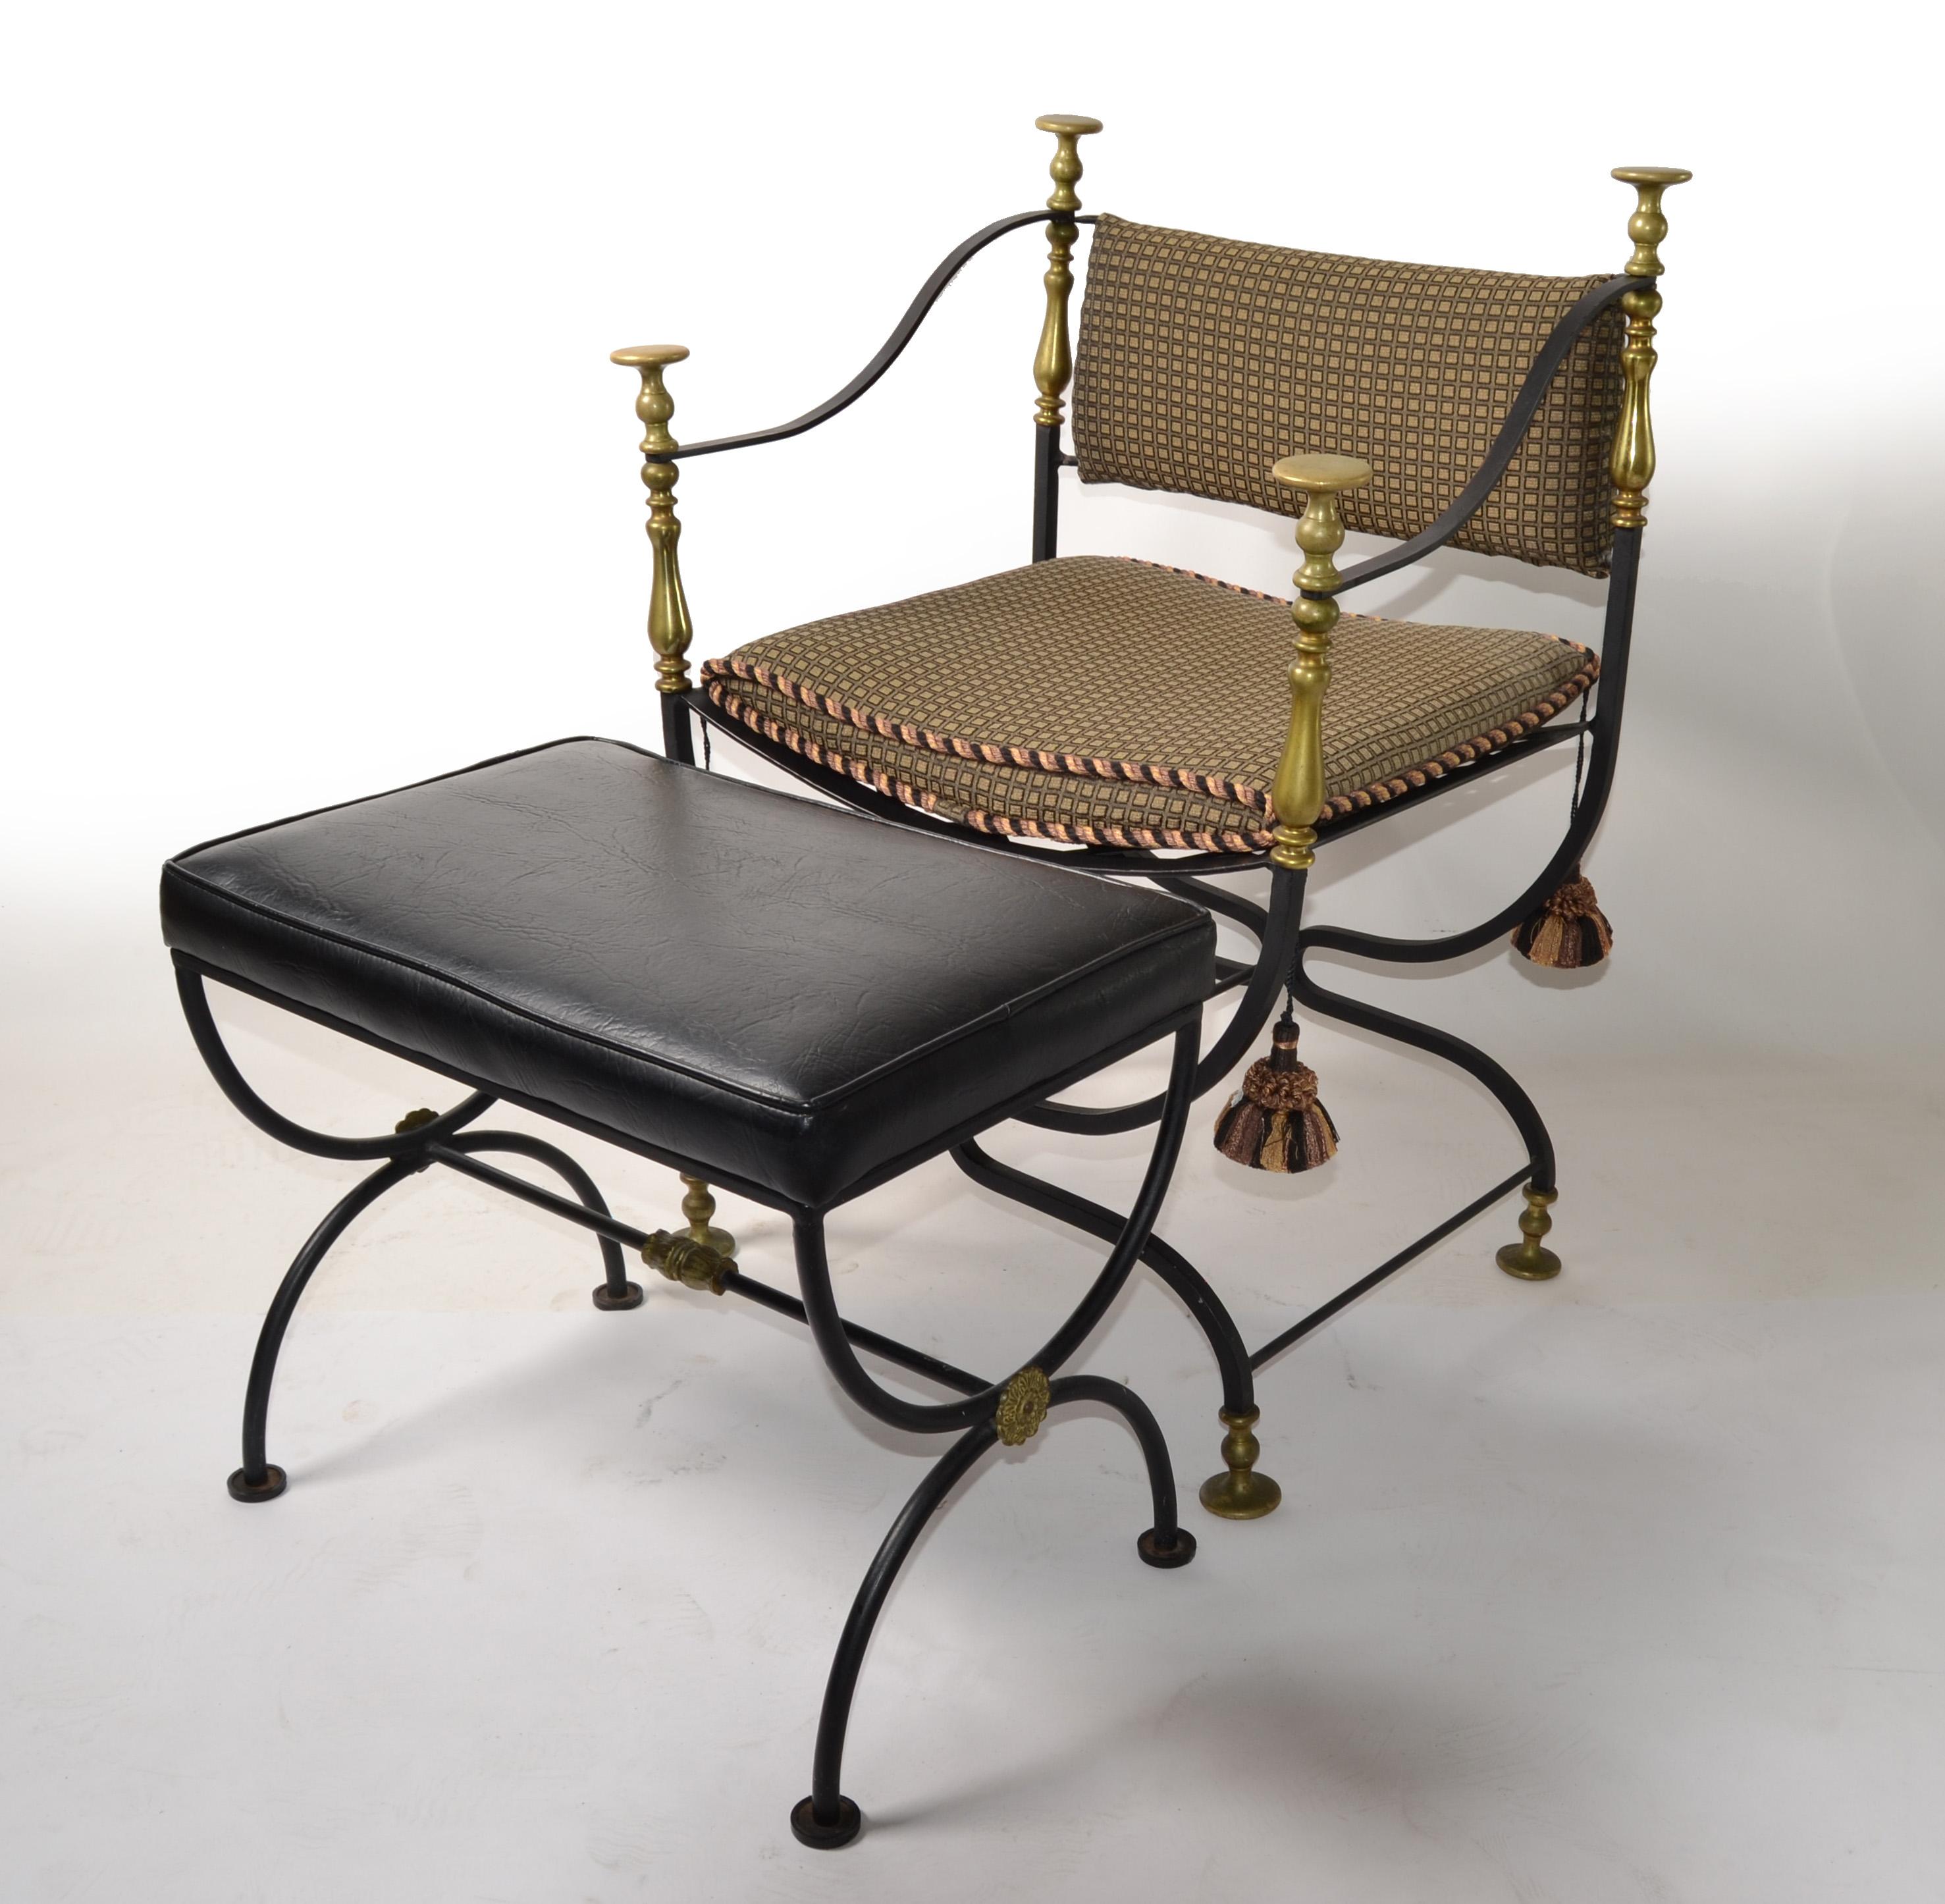 Mid-20th Century Set of Faldistori, Savonarola Armchair and Footstool or Bench in forged and wrought iron, with original polished bronze knobs and medallions brass ornaments.
The Accent Chair has the original seat and backrest Cushions.
The arched